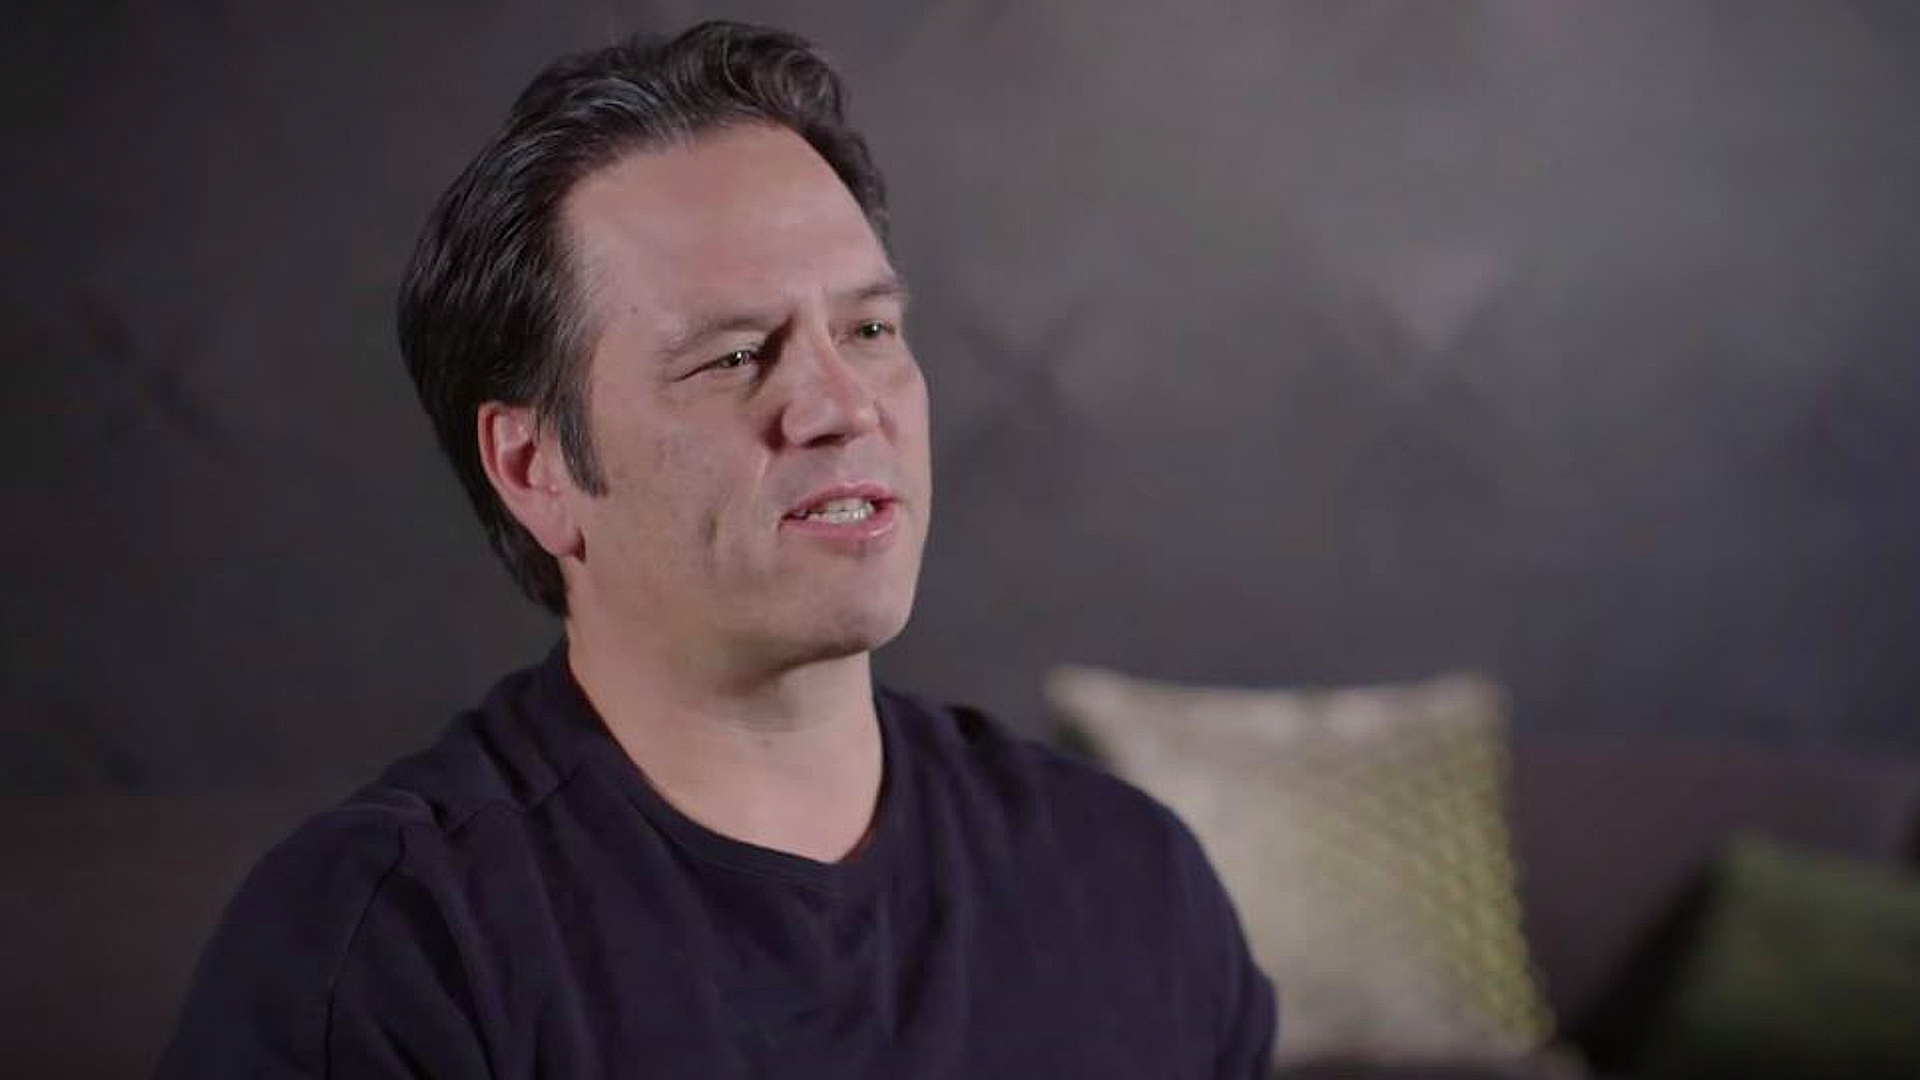 Phil Spencer: Xbox Game Pass Is Completely Sustainable The Way It